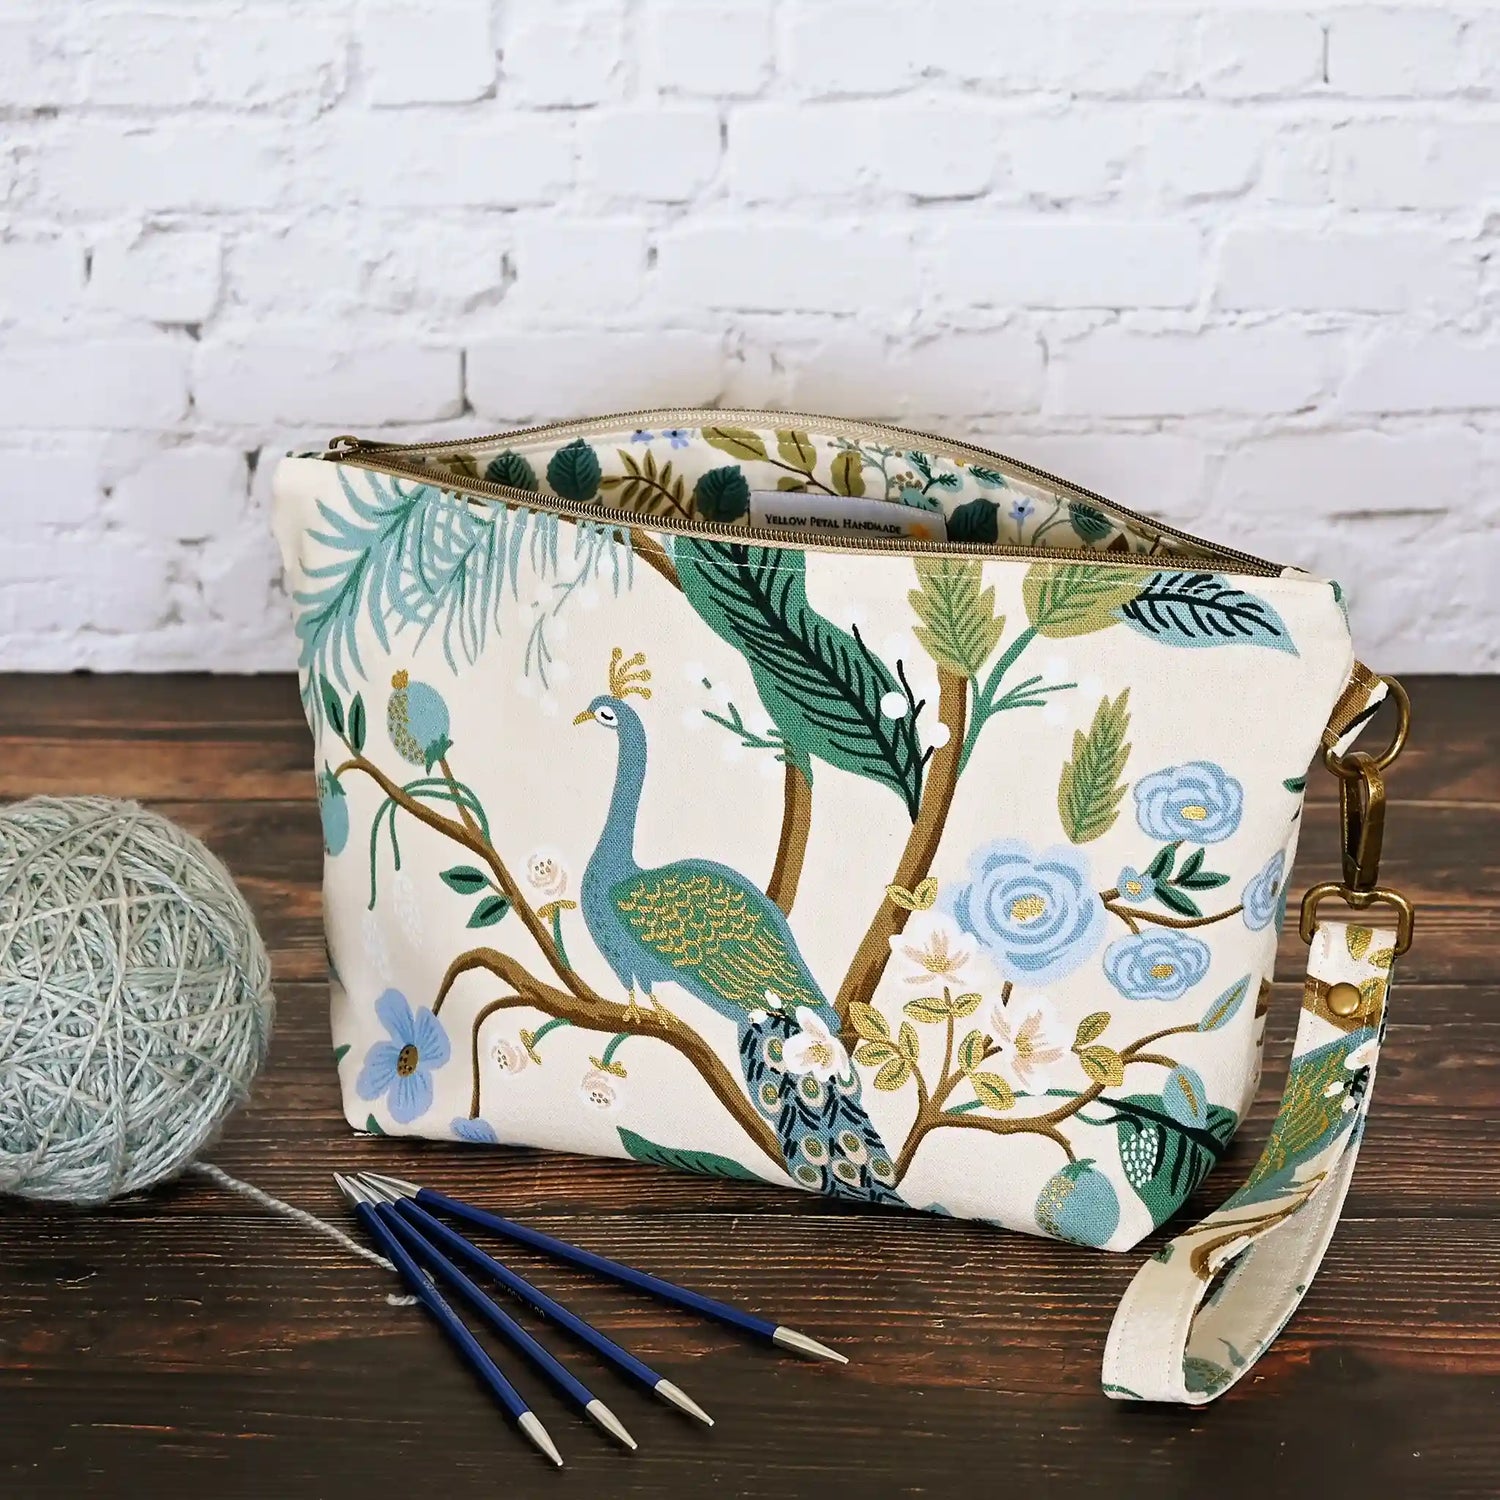 Gorgeous peacock canvas zippered pouch from Rifle Paper Co's Antique Garden collection.  Handmade in Nova Scotia, Canada.a